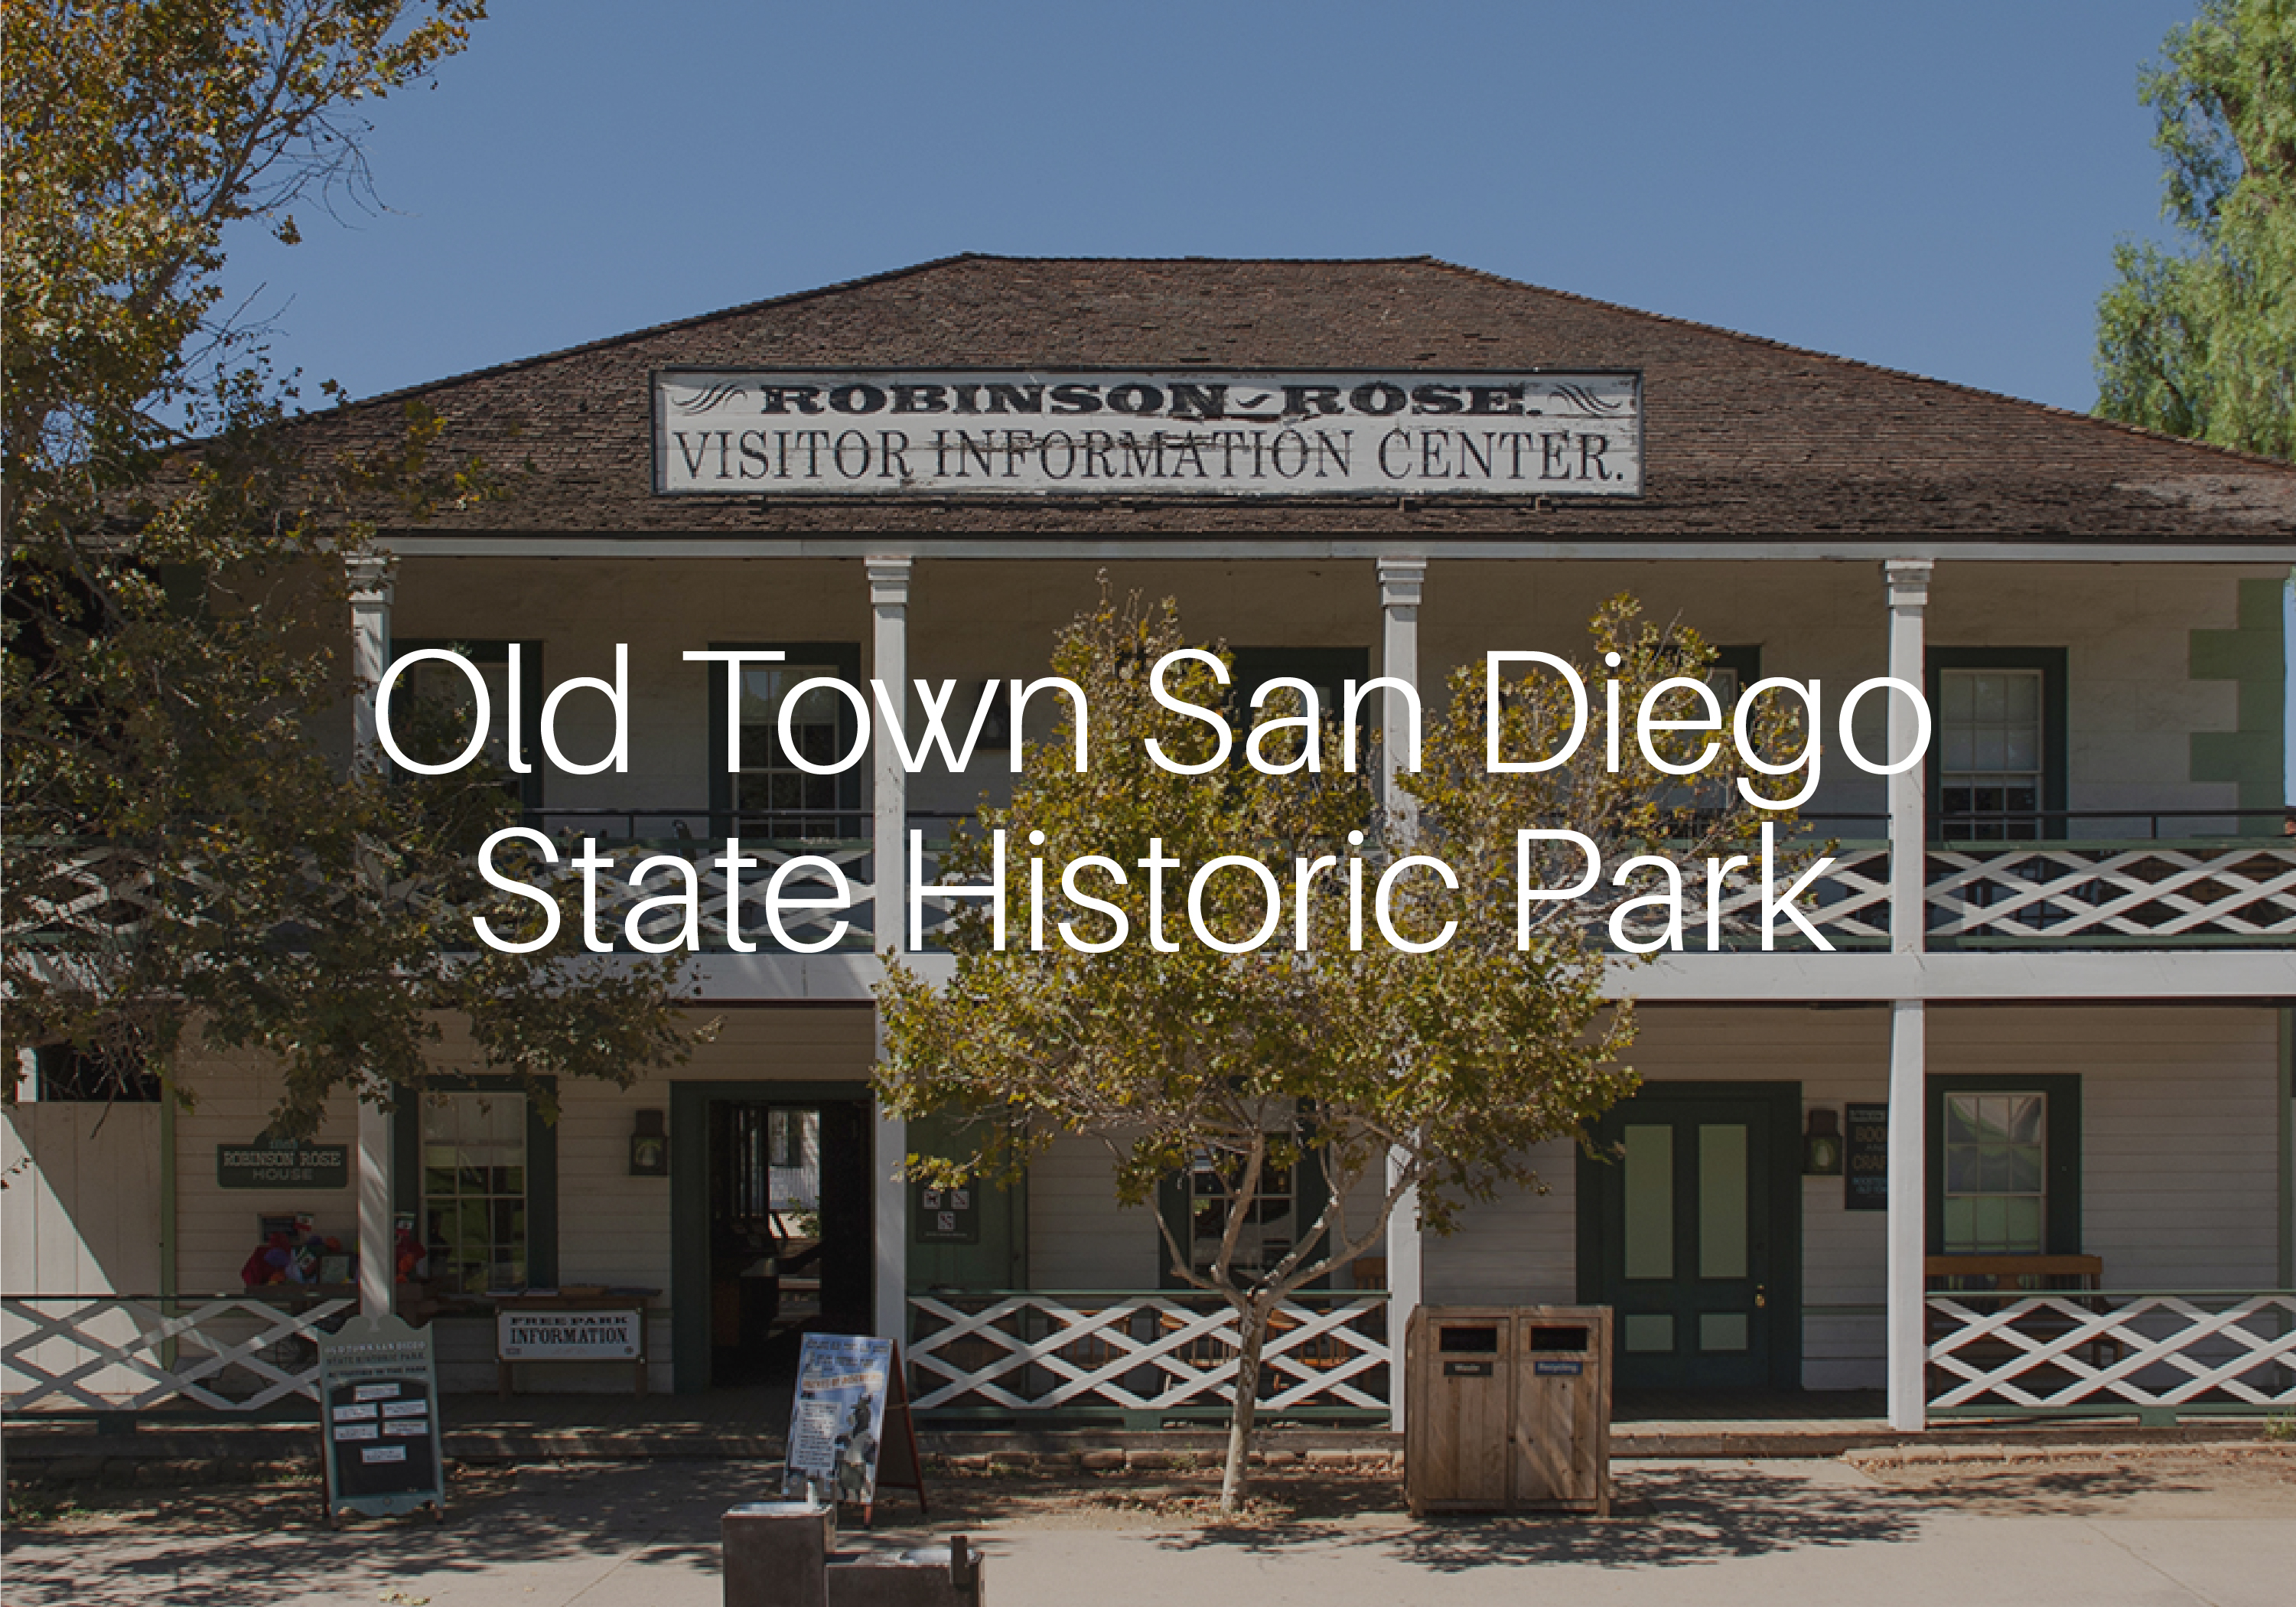 Photo of the Robinson-Rose Visitor Center in Old Town San Diego State Historic Park with the name of the park over the top of it in white san serif text. The photo is slightly dimmed to make the park name stand out.